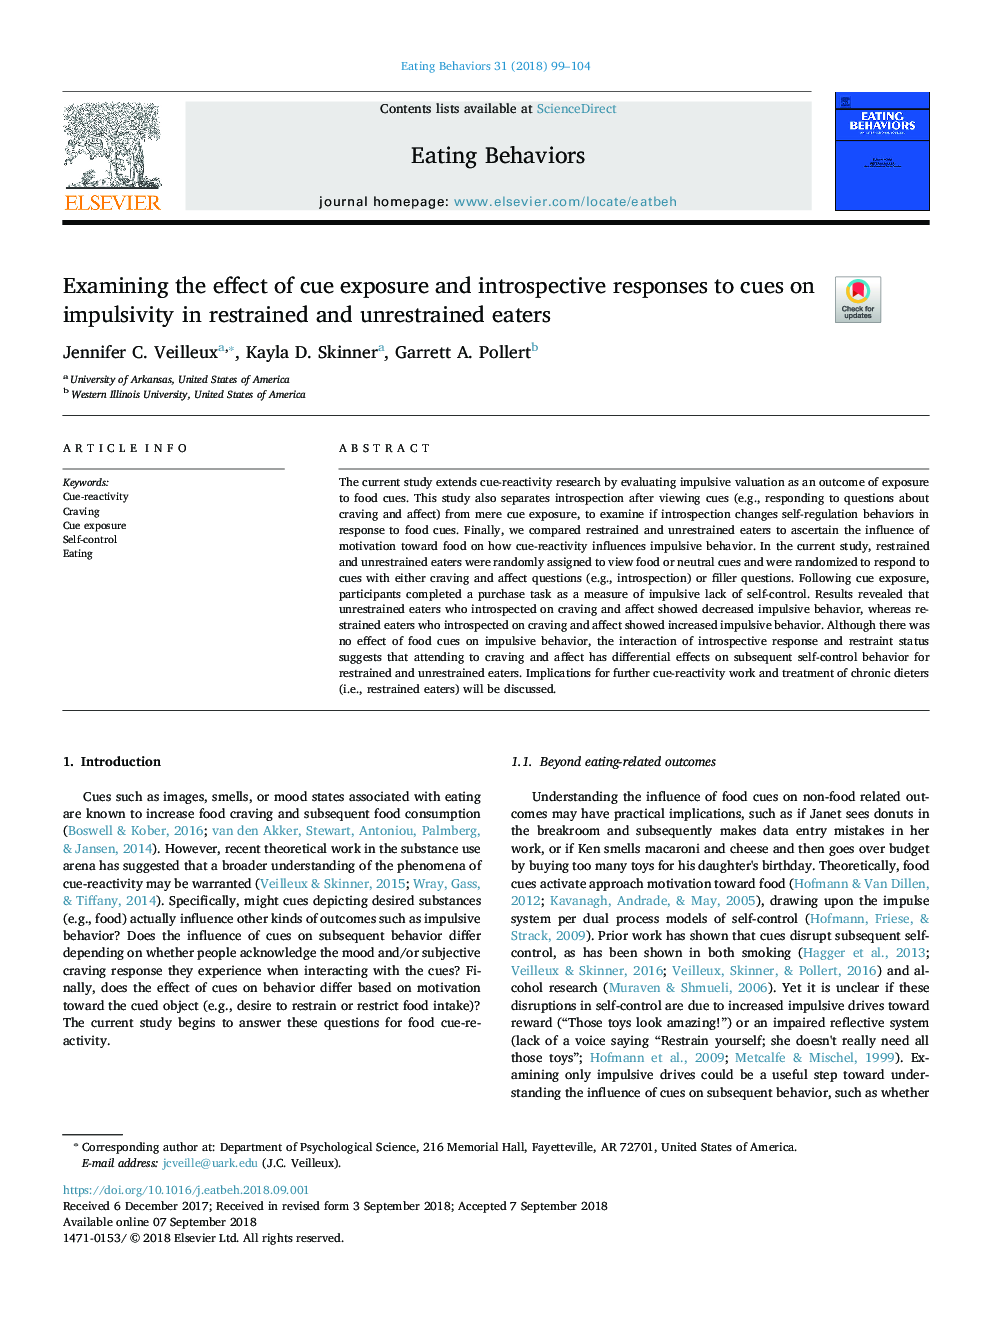 Examining the effect of cue exposure and introspective responses to cues on impulsivity in restrained and unrestrained eaters